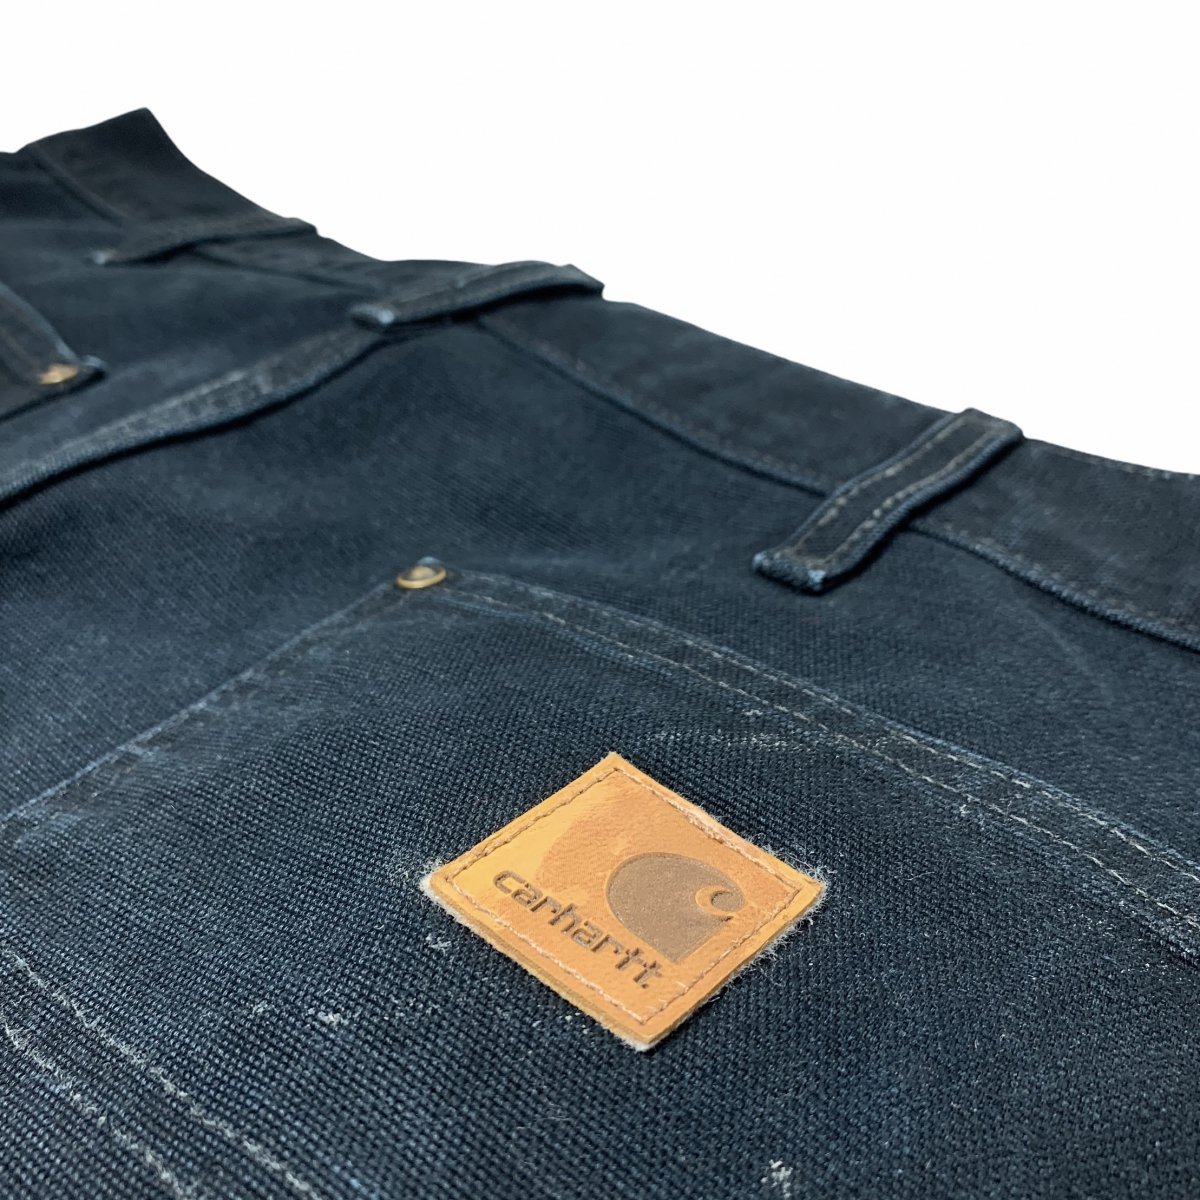 Carhartt Washed Duck Double Front Work Dungaree 黒 W34×L32